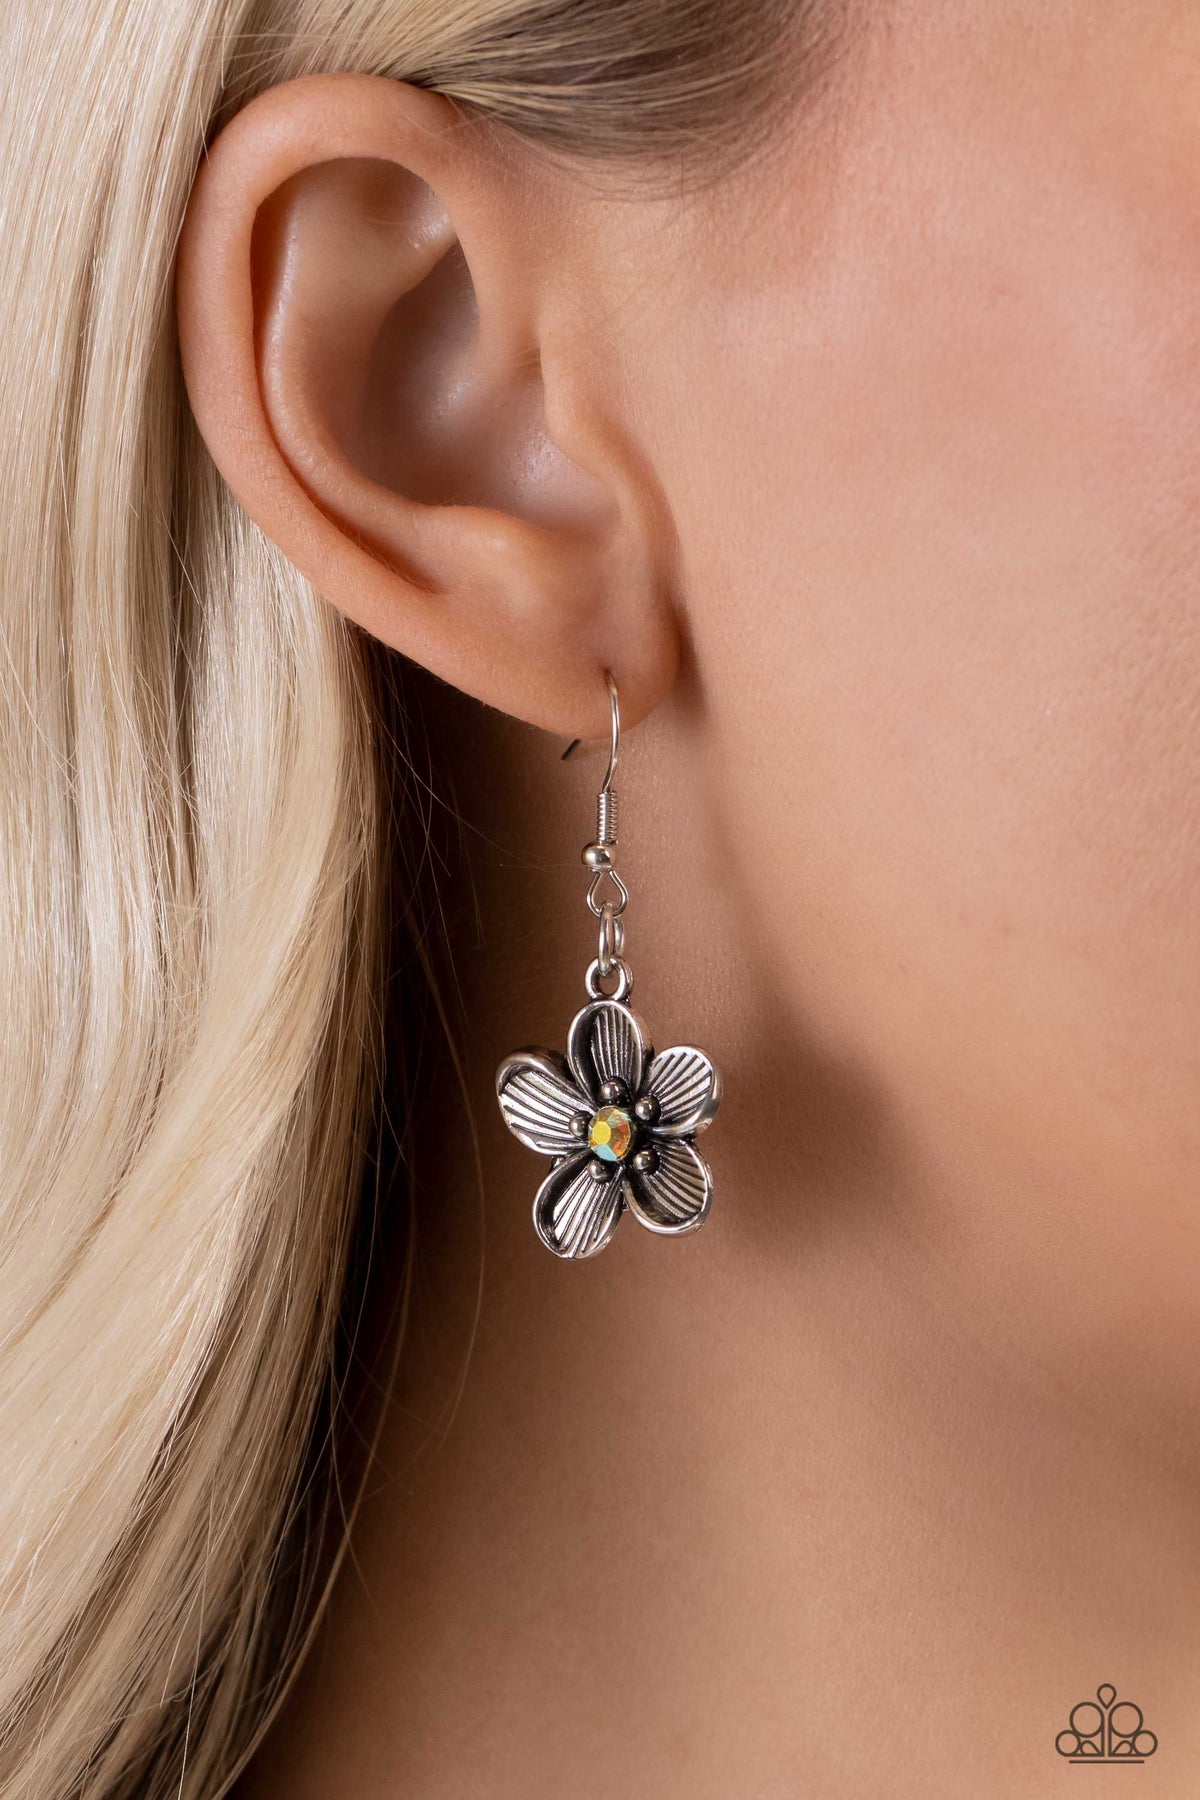 Free FLORAL Yellow Flower Necklace - Paparazzi Accessories - free matching earrings - CarasShop.com - $5 Jewelry by Cara Jewels